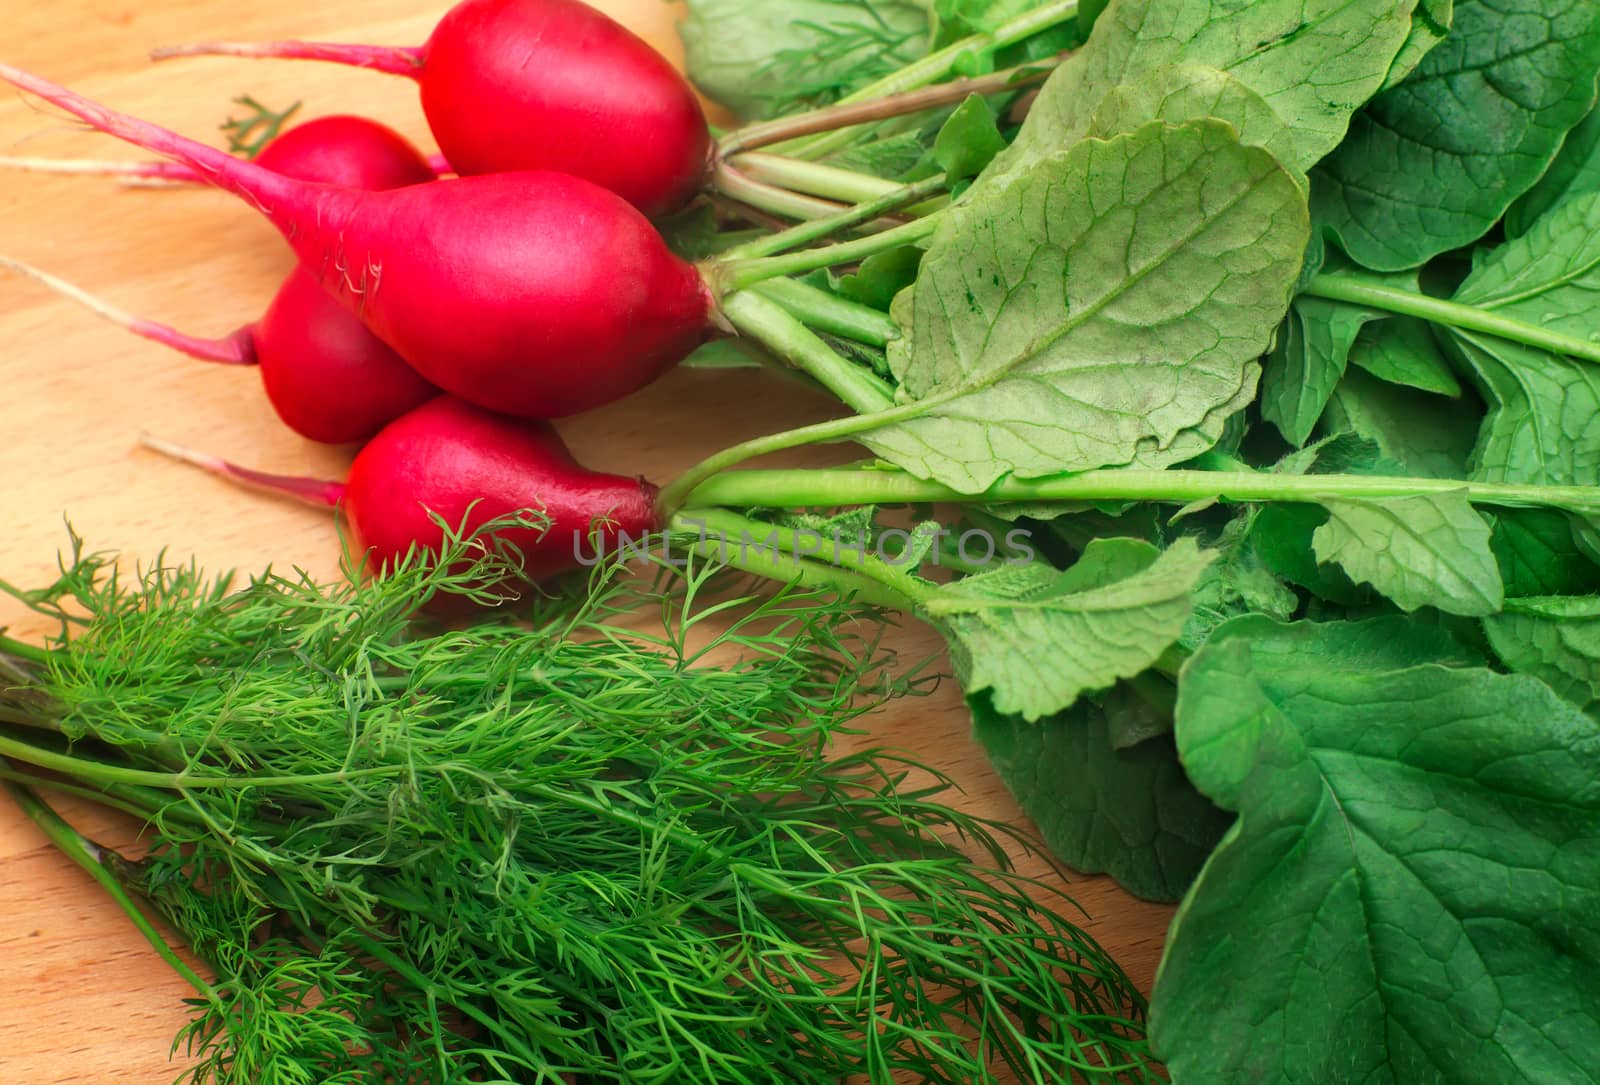 Vegetables for salad: bright red radish with green leaves and green twigs of dill. Lying on the kitchen blackboard.